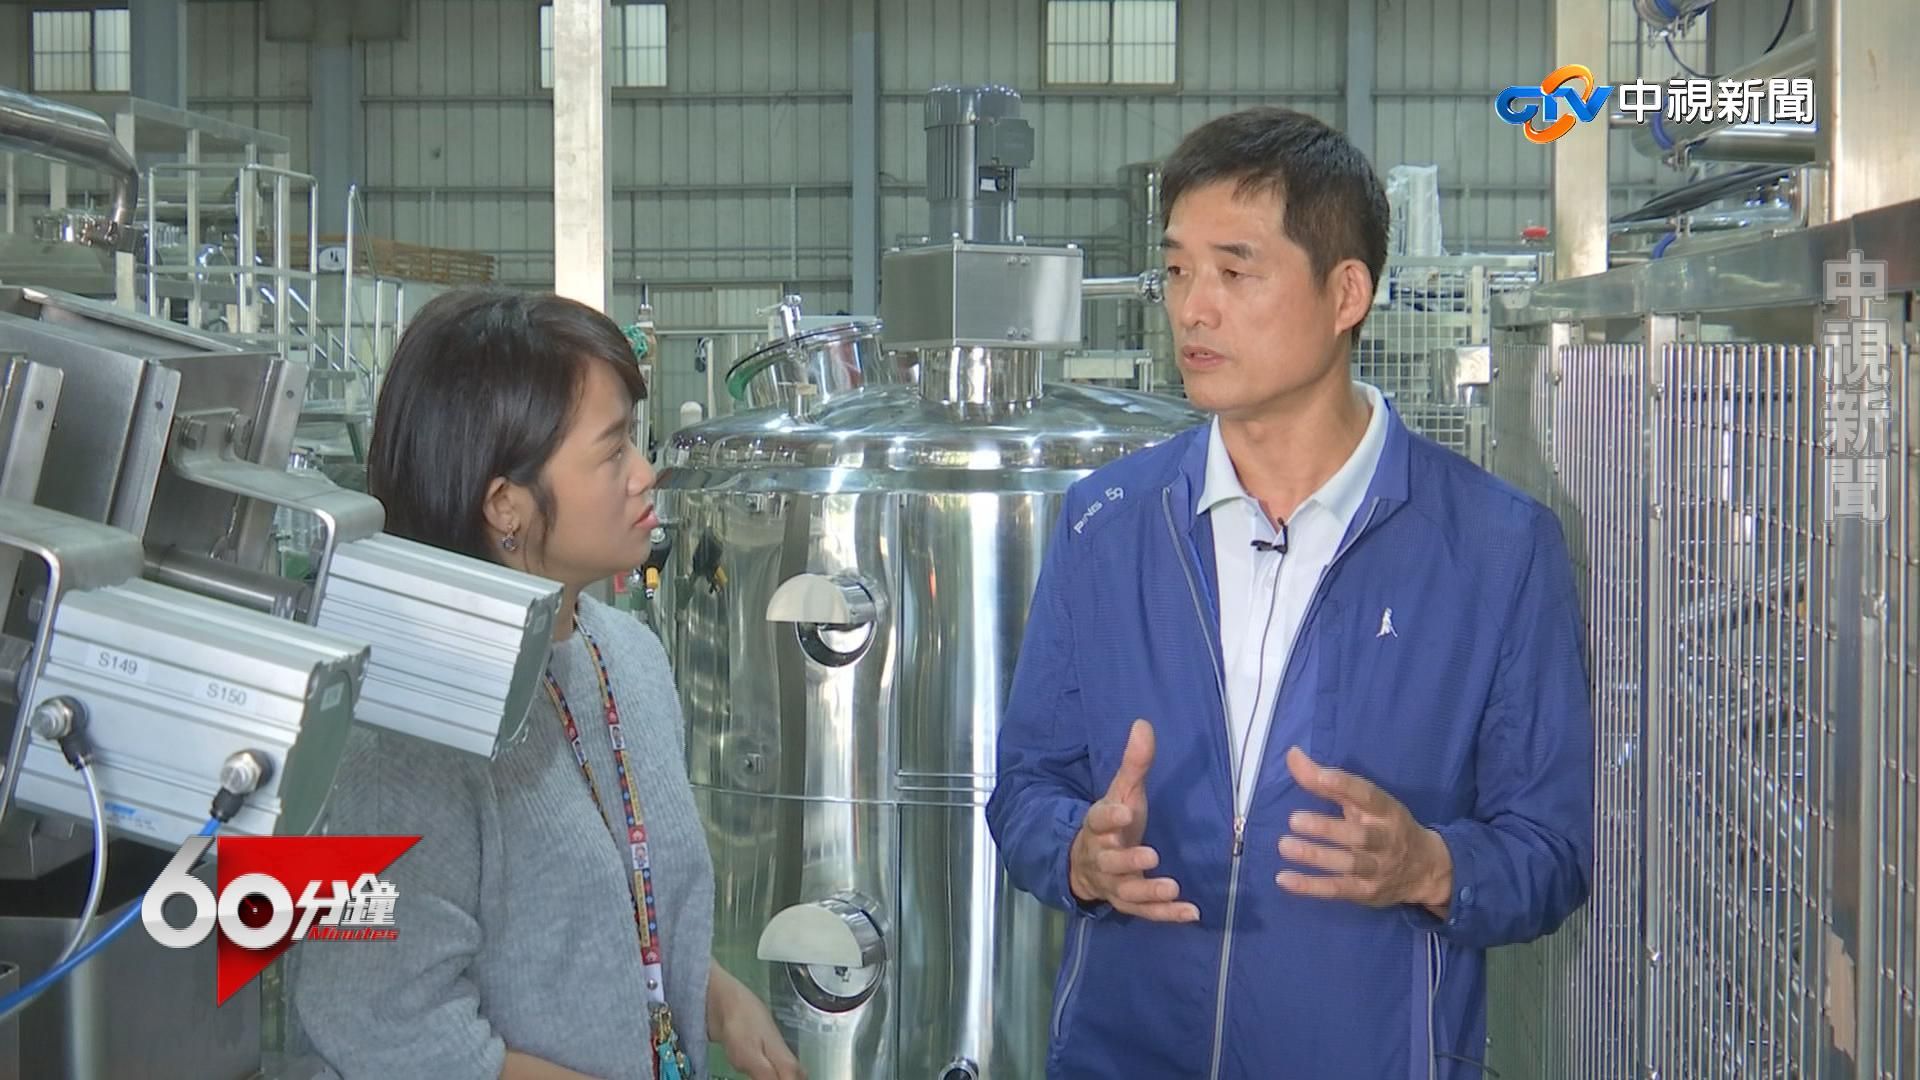 Brian Cheng, intake protein, Vegetable Protein, soy isoflavones, meat substitutes, Meat analogue, vegetarian meat, soy milk and tofu making machine, vegetable tofu